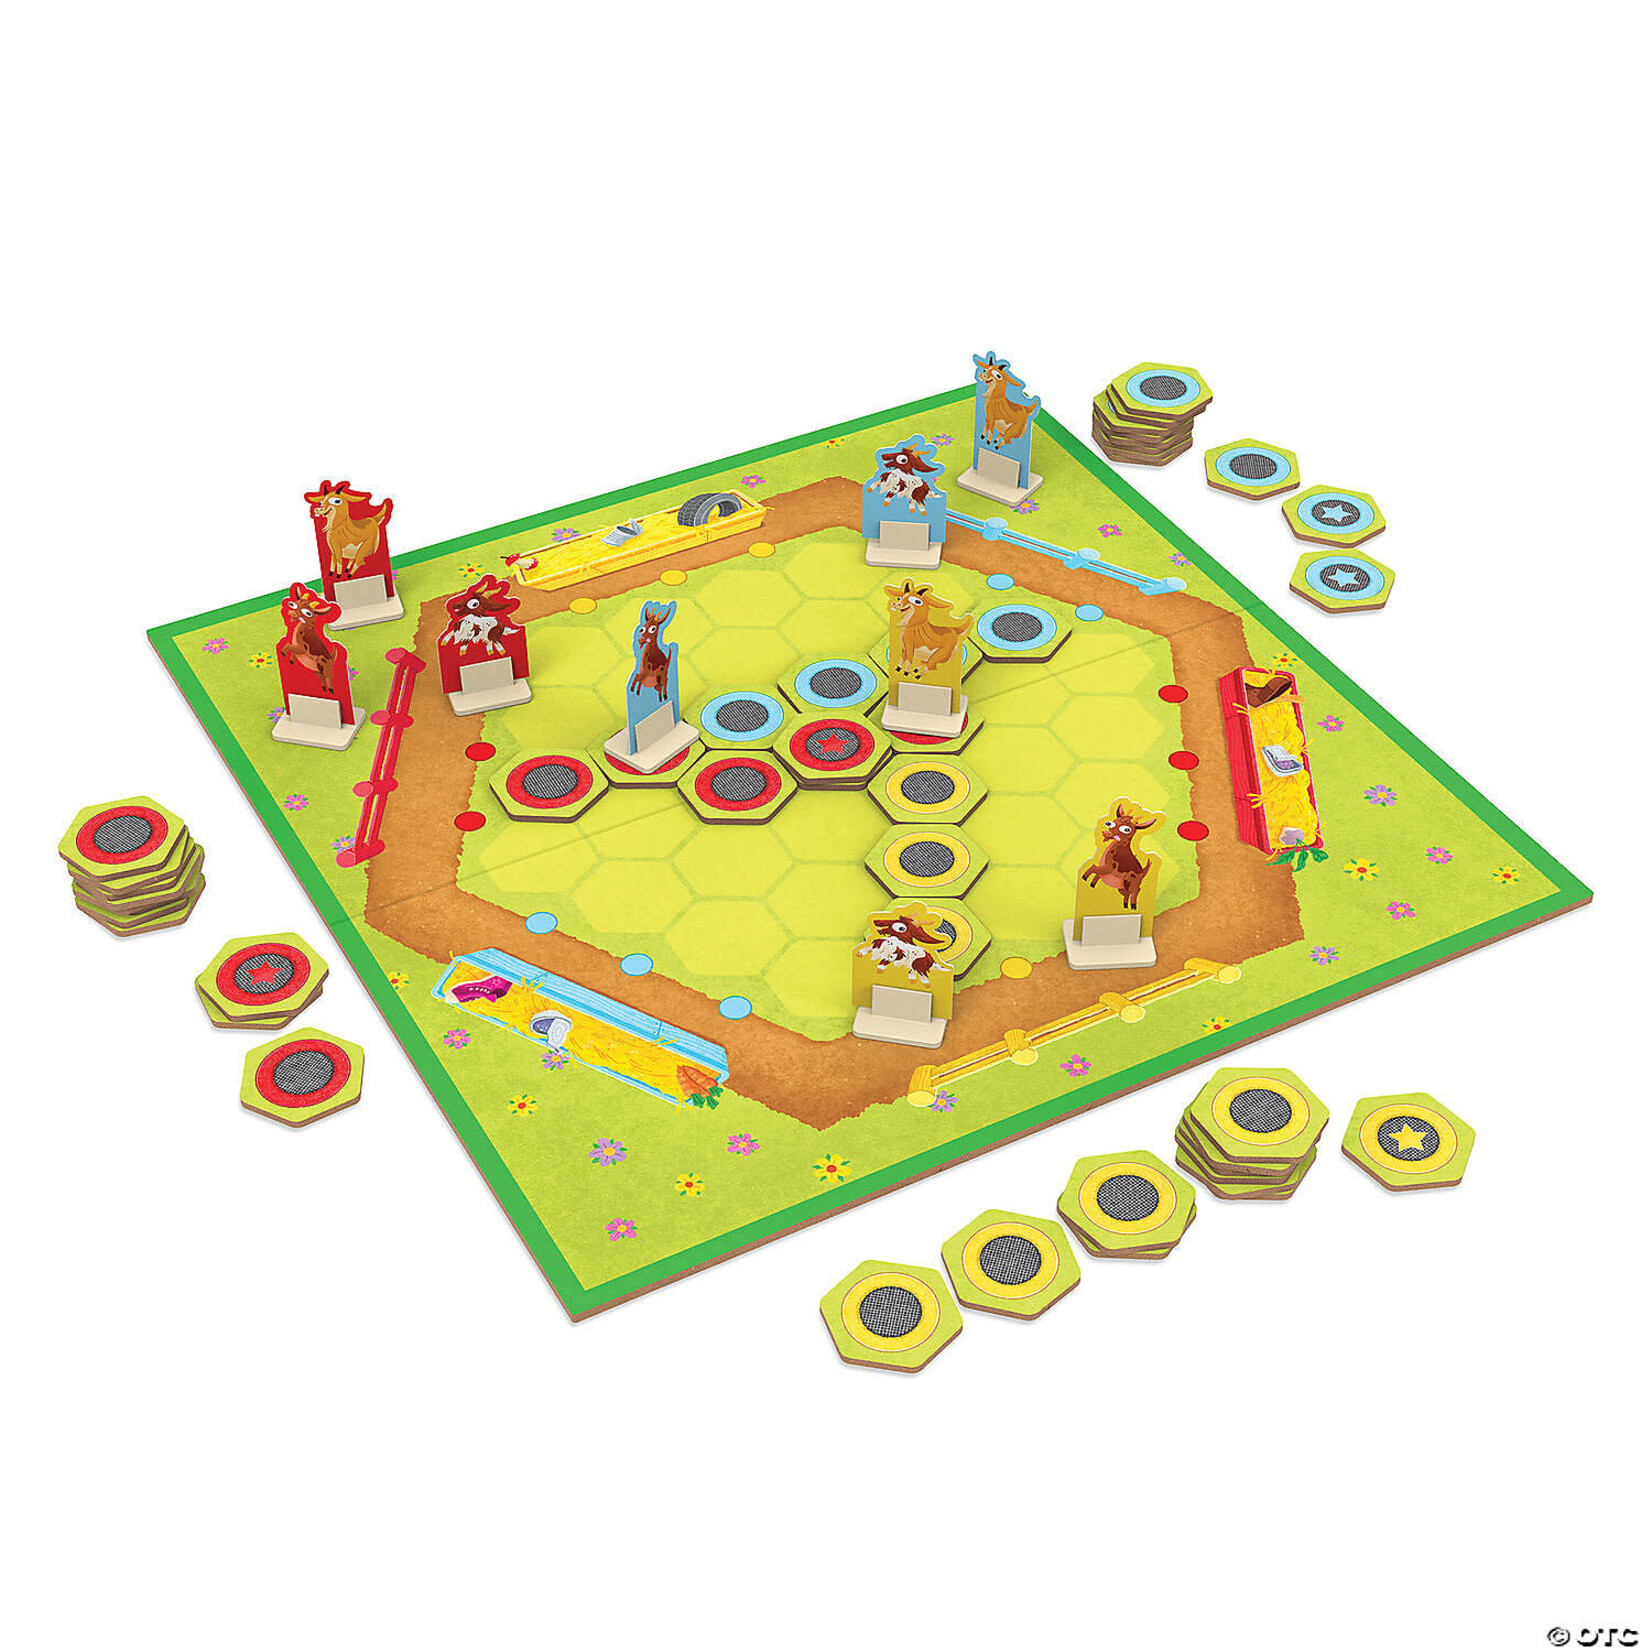 Mindware Bouncin' Billy Goats: Ba-Ba-Bounce Your Way to Victory!